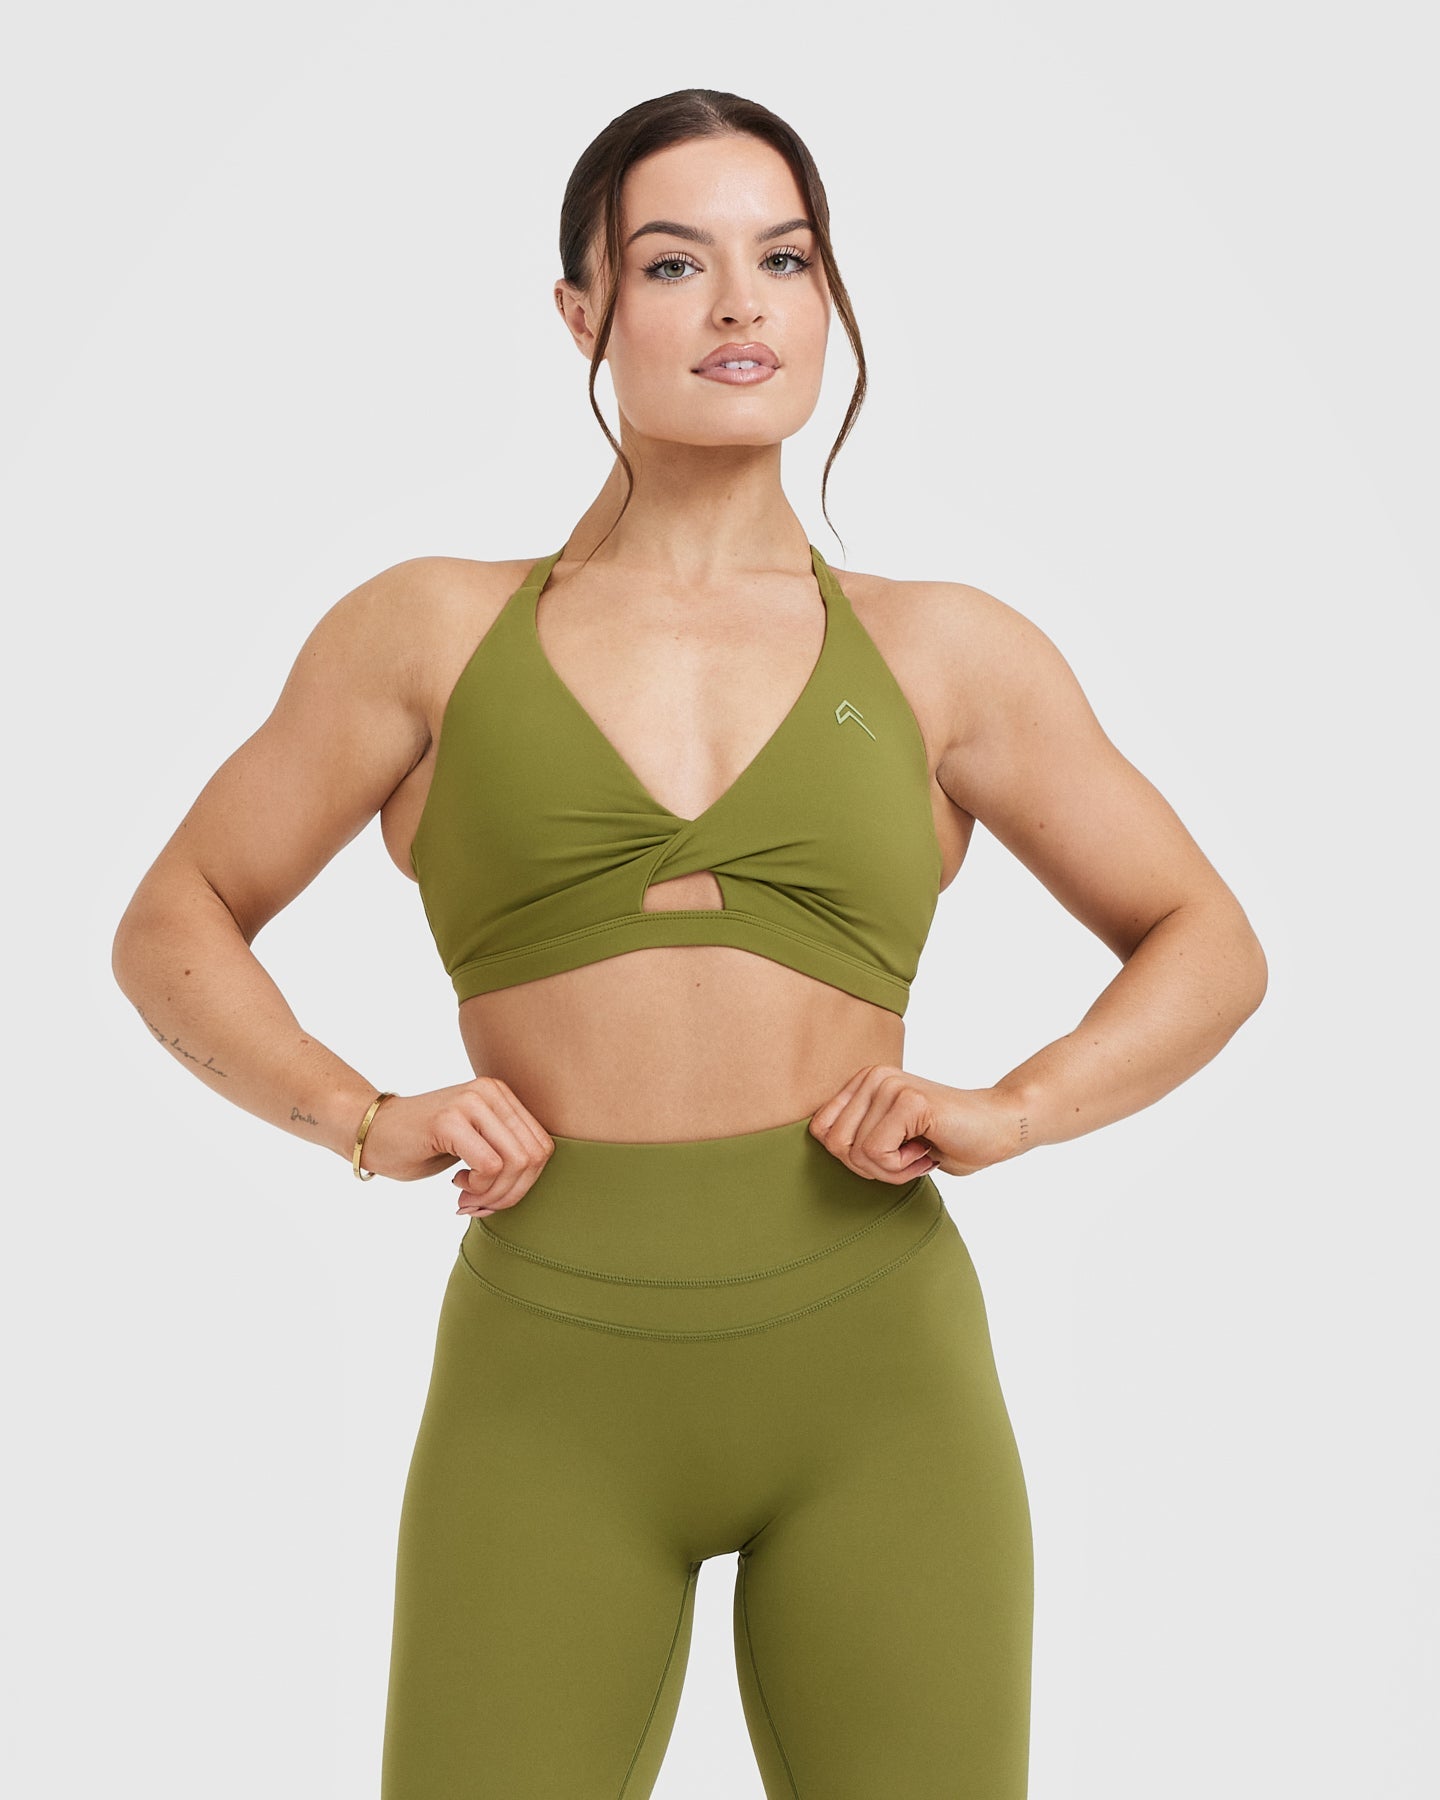 Sports Bra Composition- Nylon 62%, Polyester 38% Maximum Support Comfort  High-Impact Moisture-Wicking Fabric Active Women Green